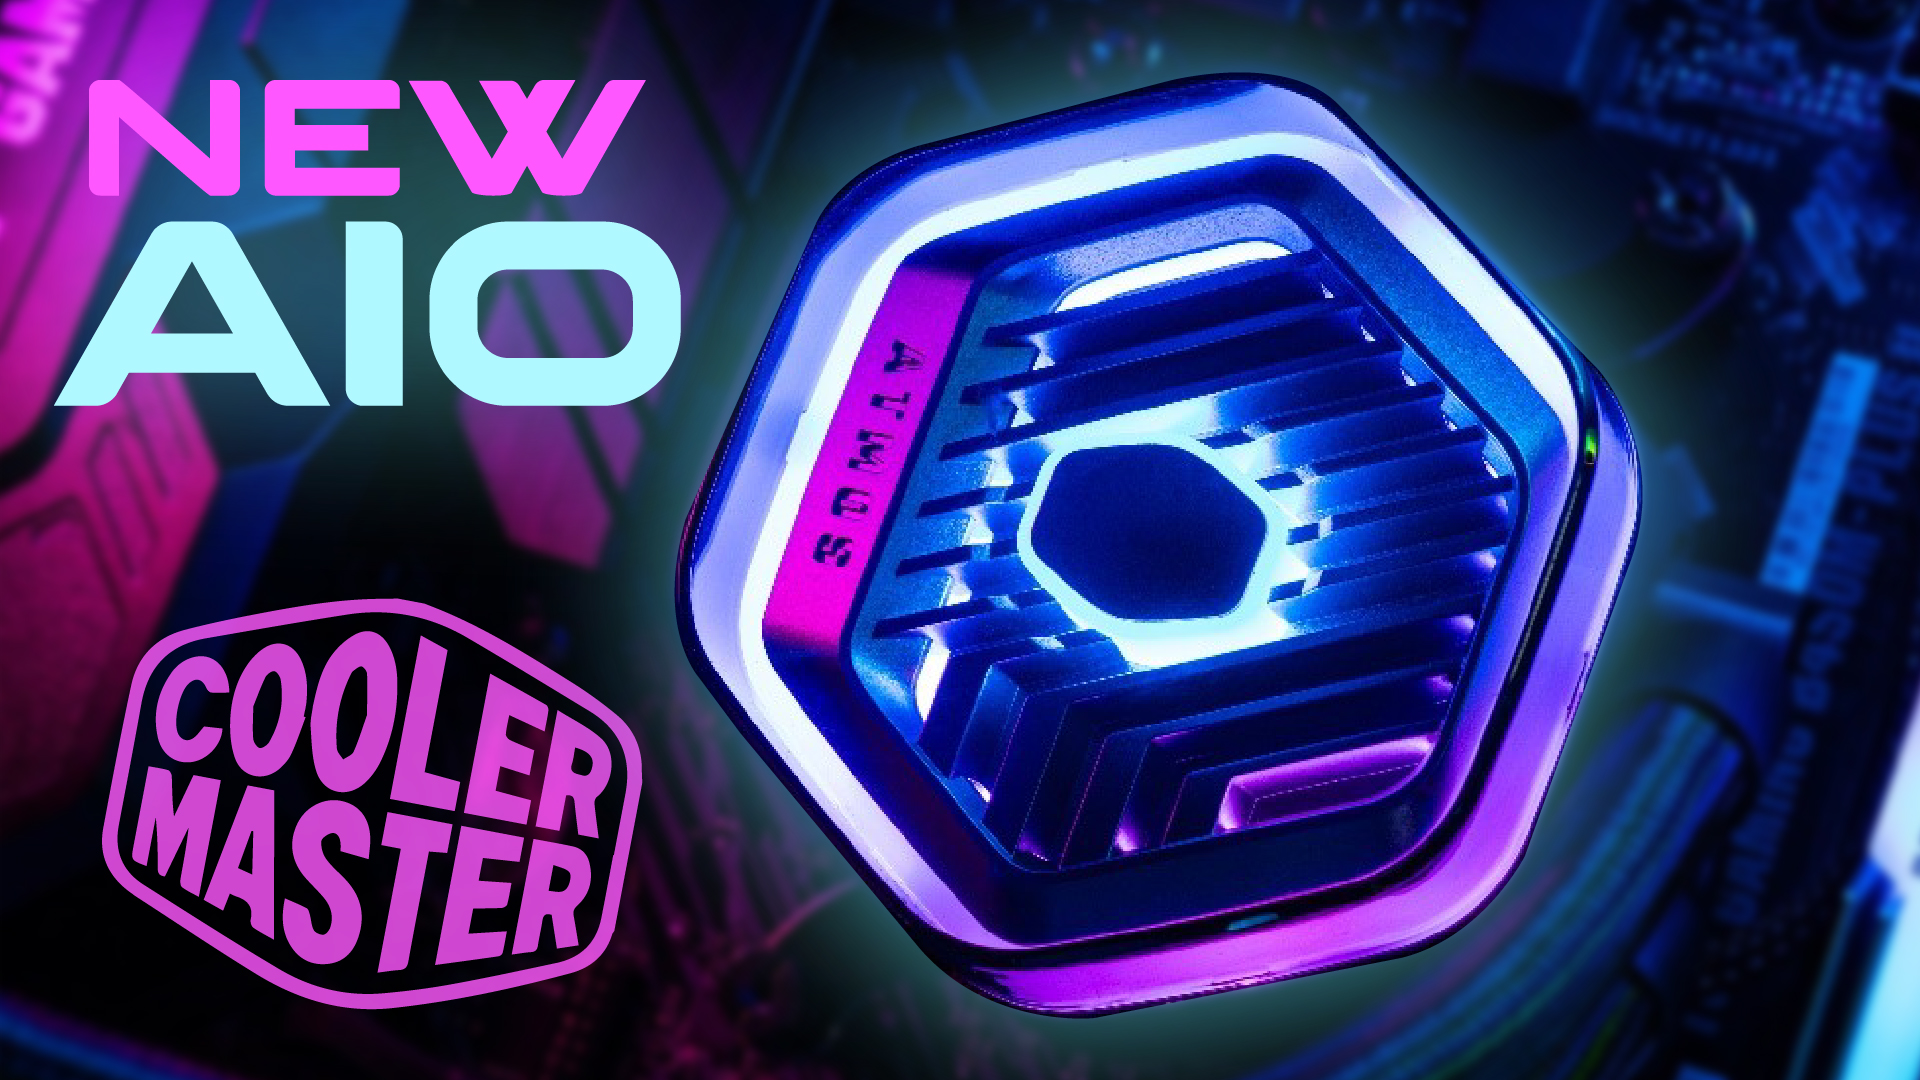 MasterLiquid Atmos: The New Line-up of Cooler Master AIO’s